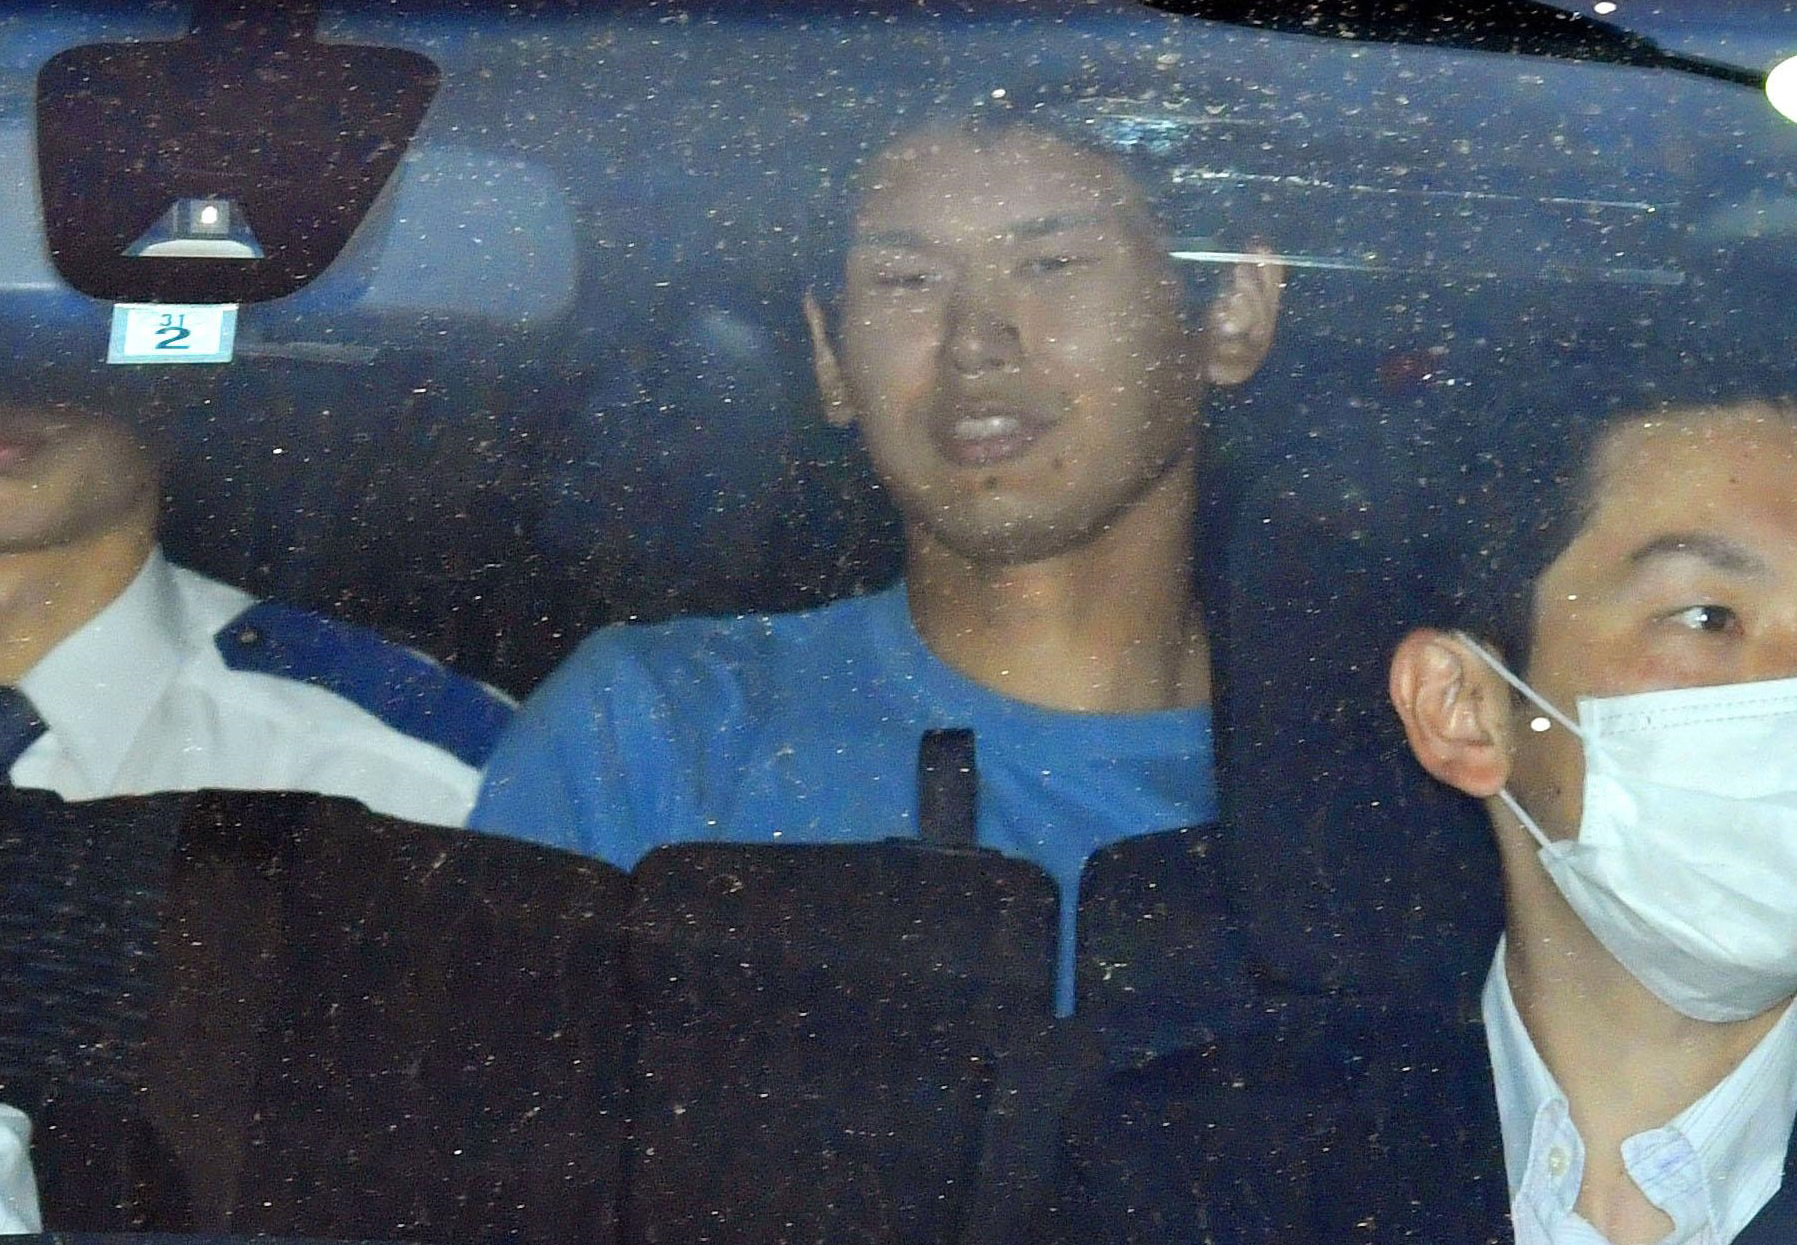 Tomohiro Iwazaki, arrested following Saturday's stabbing of singer Mayu Tomita, is transported from Koganei Police Station in western Tokyo on Monday. | KYODO